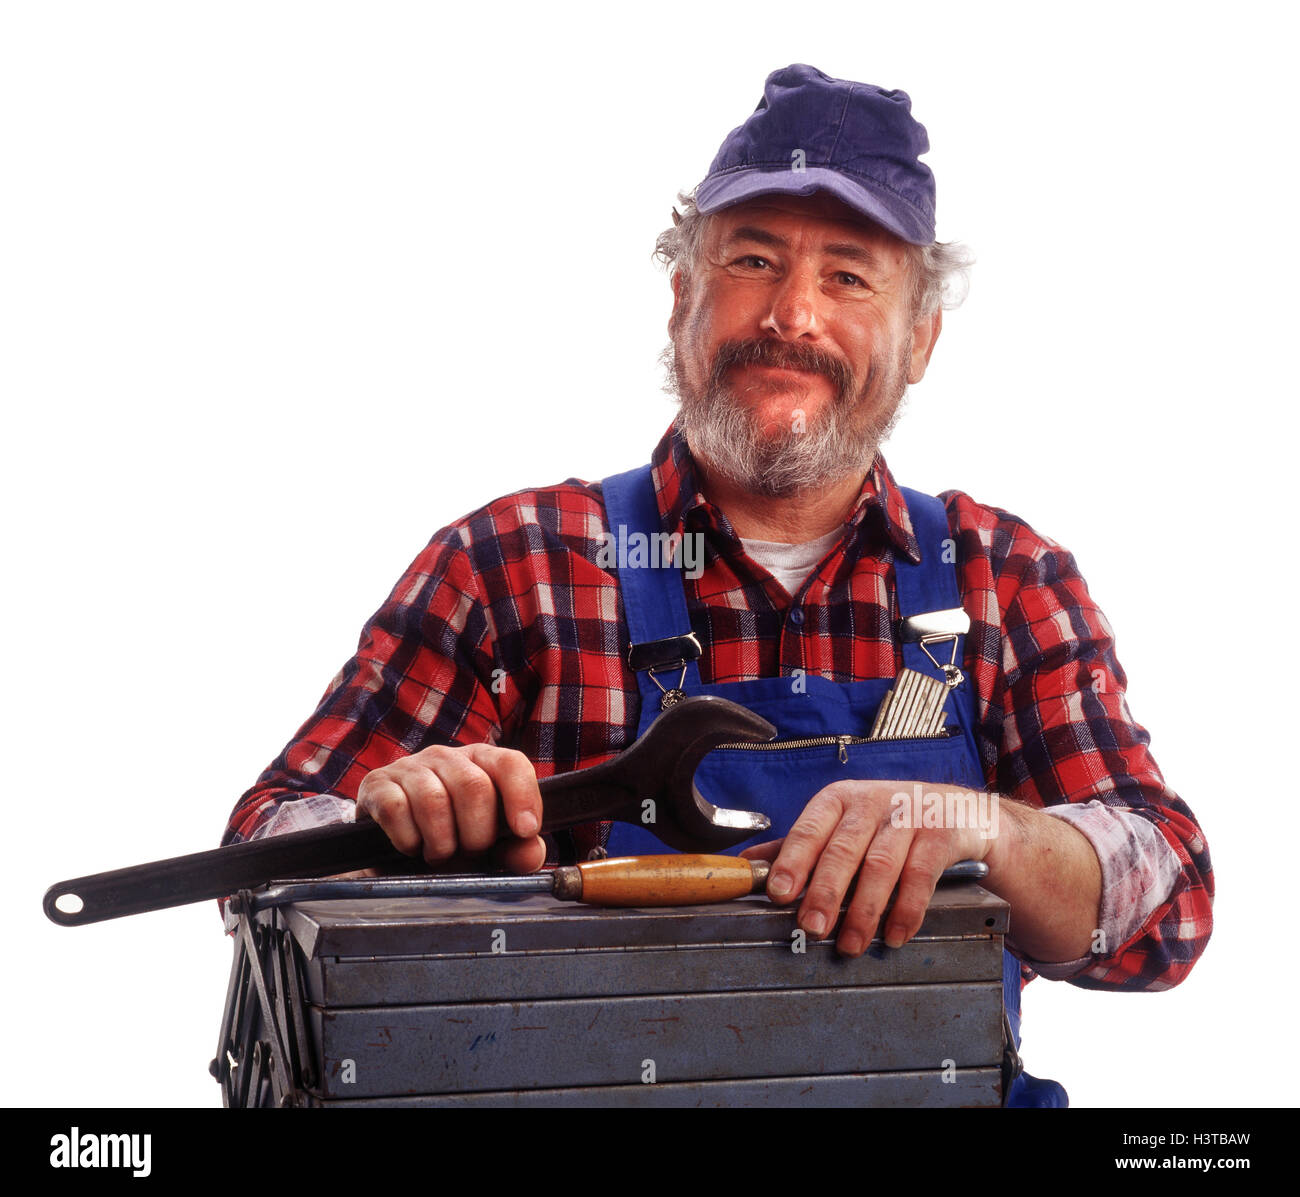 Plumber, happily, toolbox, spanner, half portrait, professions, studio, copy space, craftsman, man, boss, worker, working clothes, overall, Stock Photo